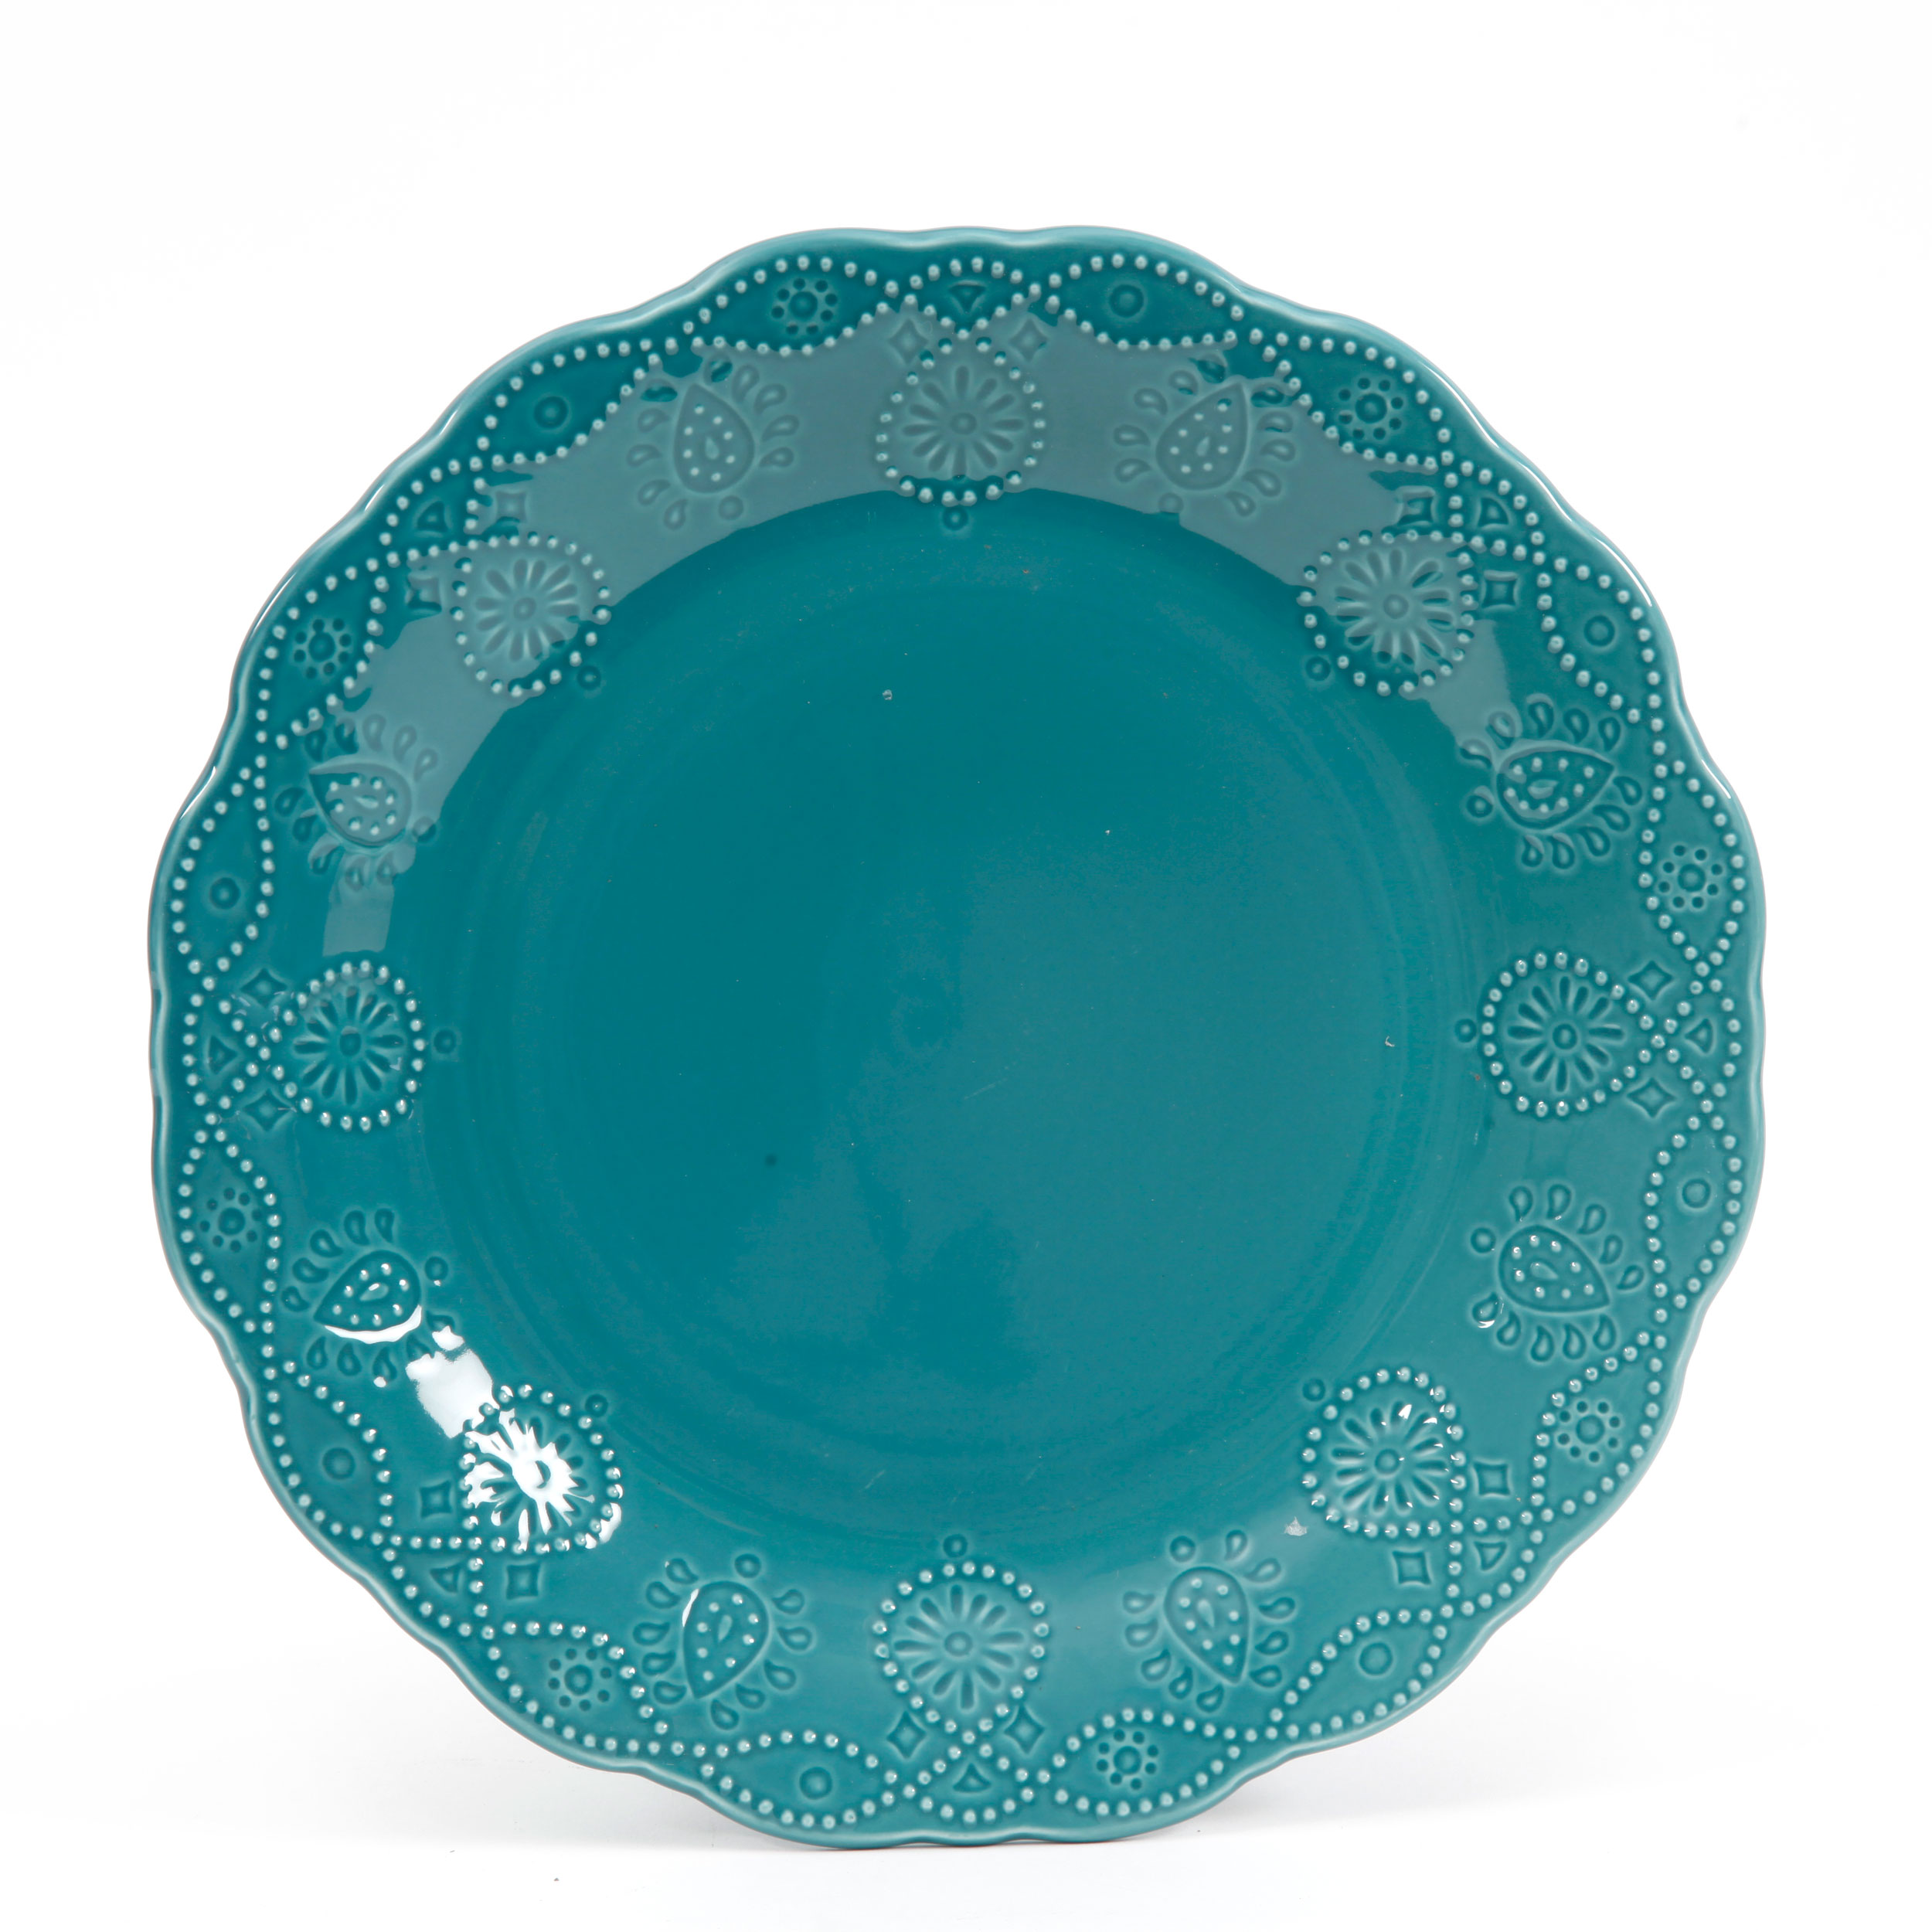 The Pioneer Woman Cowgirl Lace 12-Piece Dinnerware Set, Teal - image 3 of 7